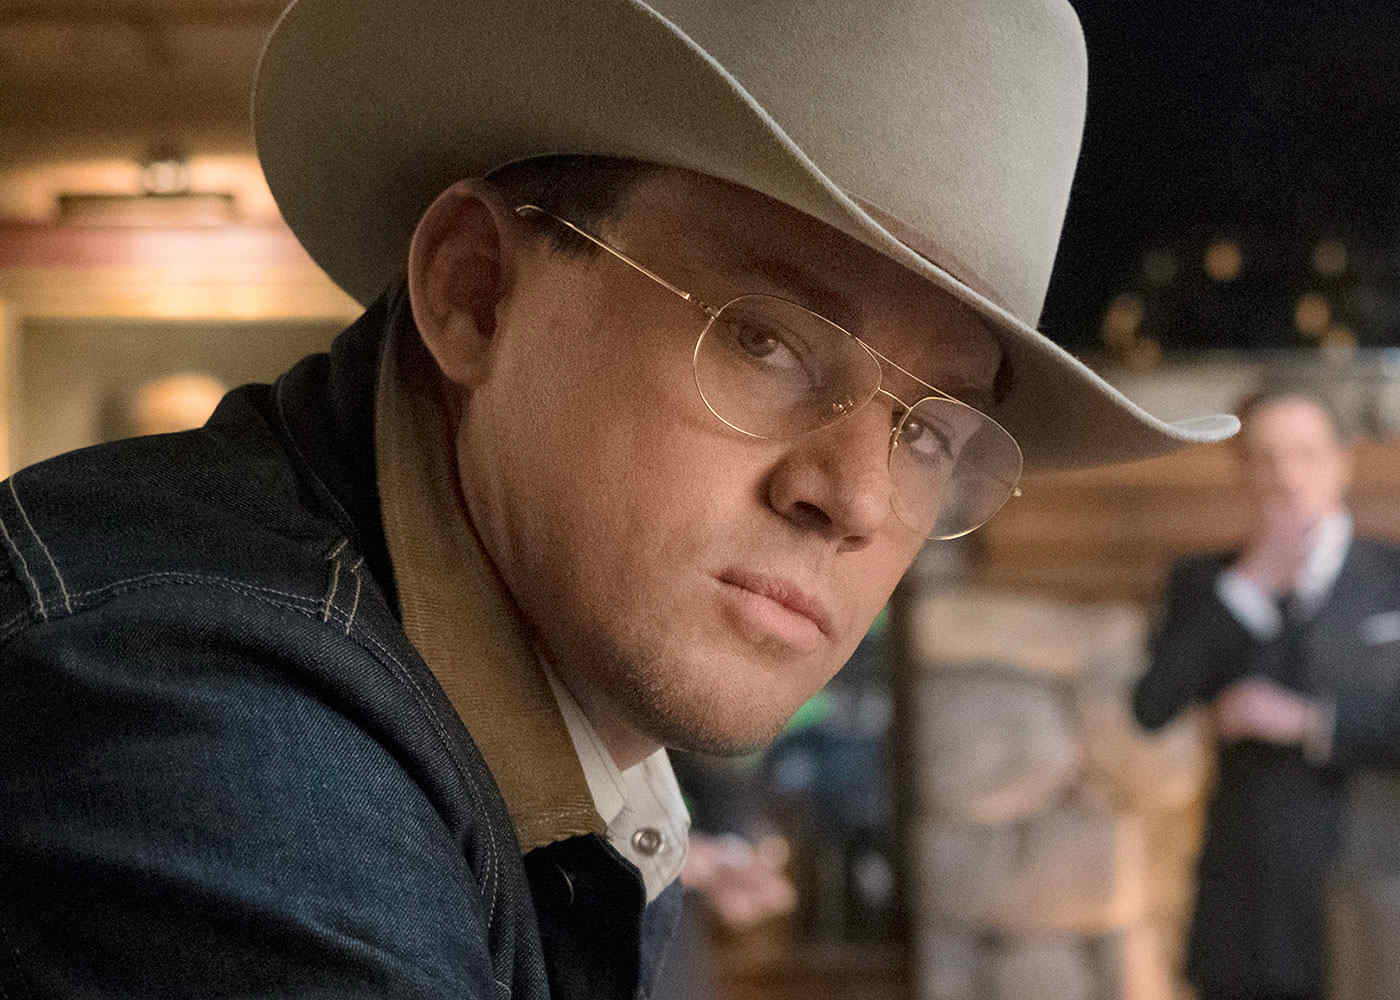 Kingsman: The Golden Circle Trailer & Images: Eggsy and Harry Hart Return